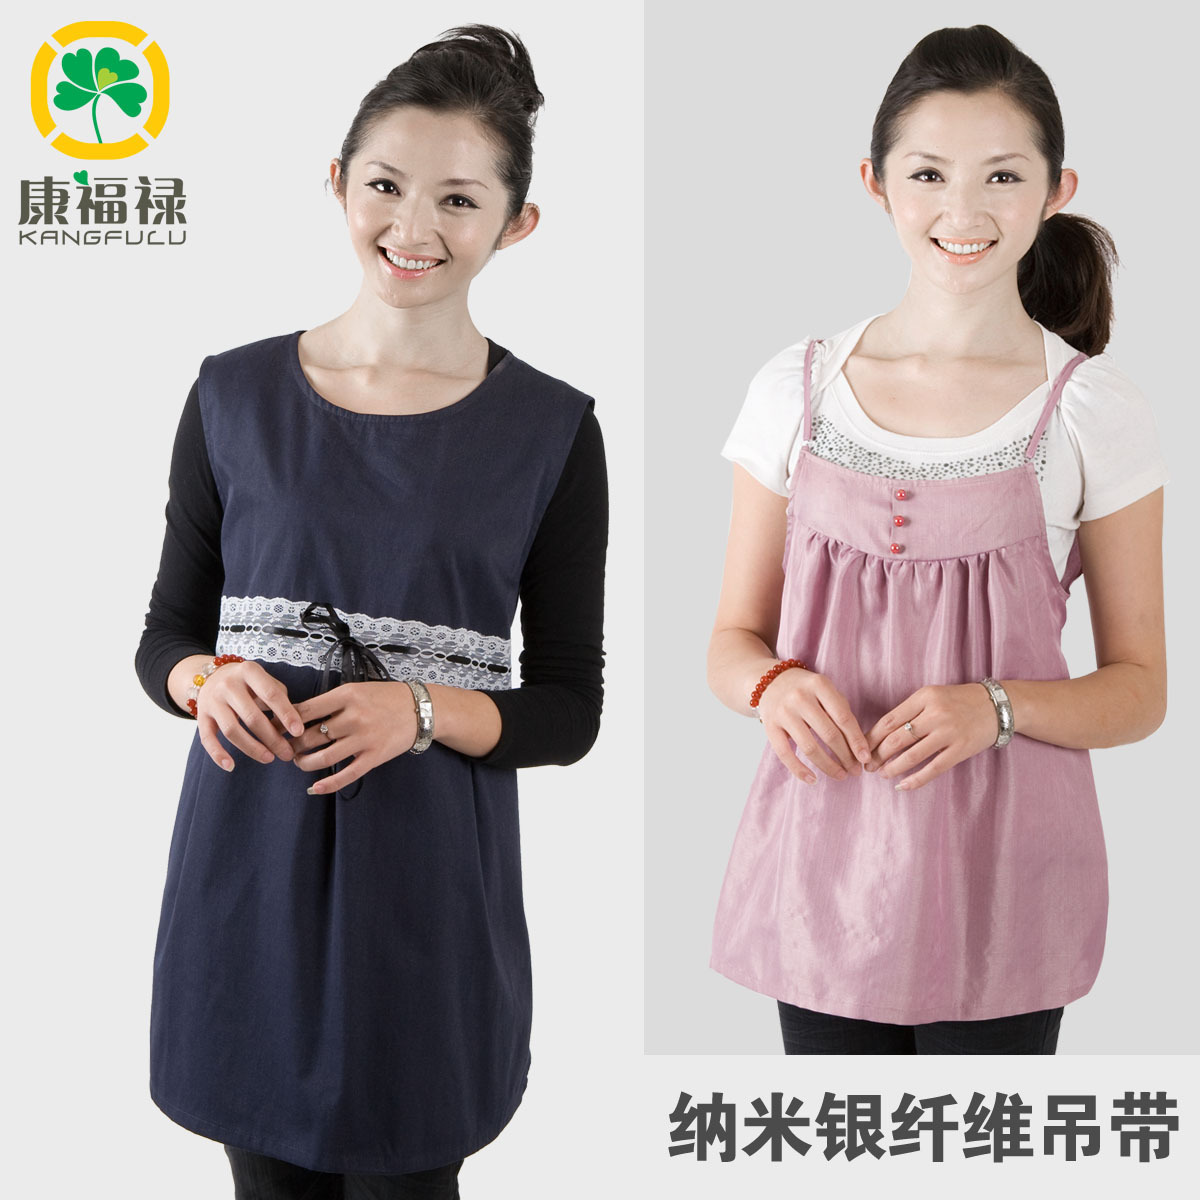 Double radiation-resistant nano silver fiber radiation-resistant maternity clothing 602y205